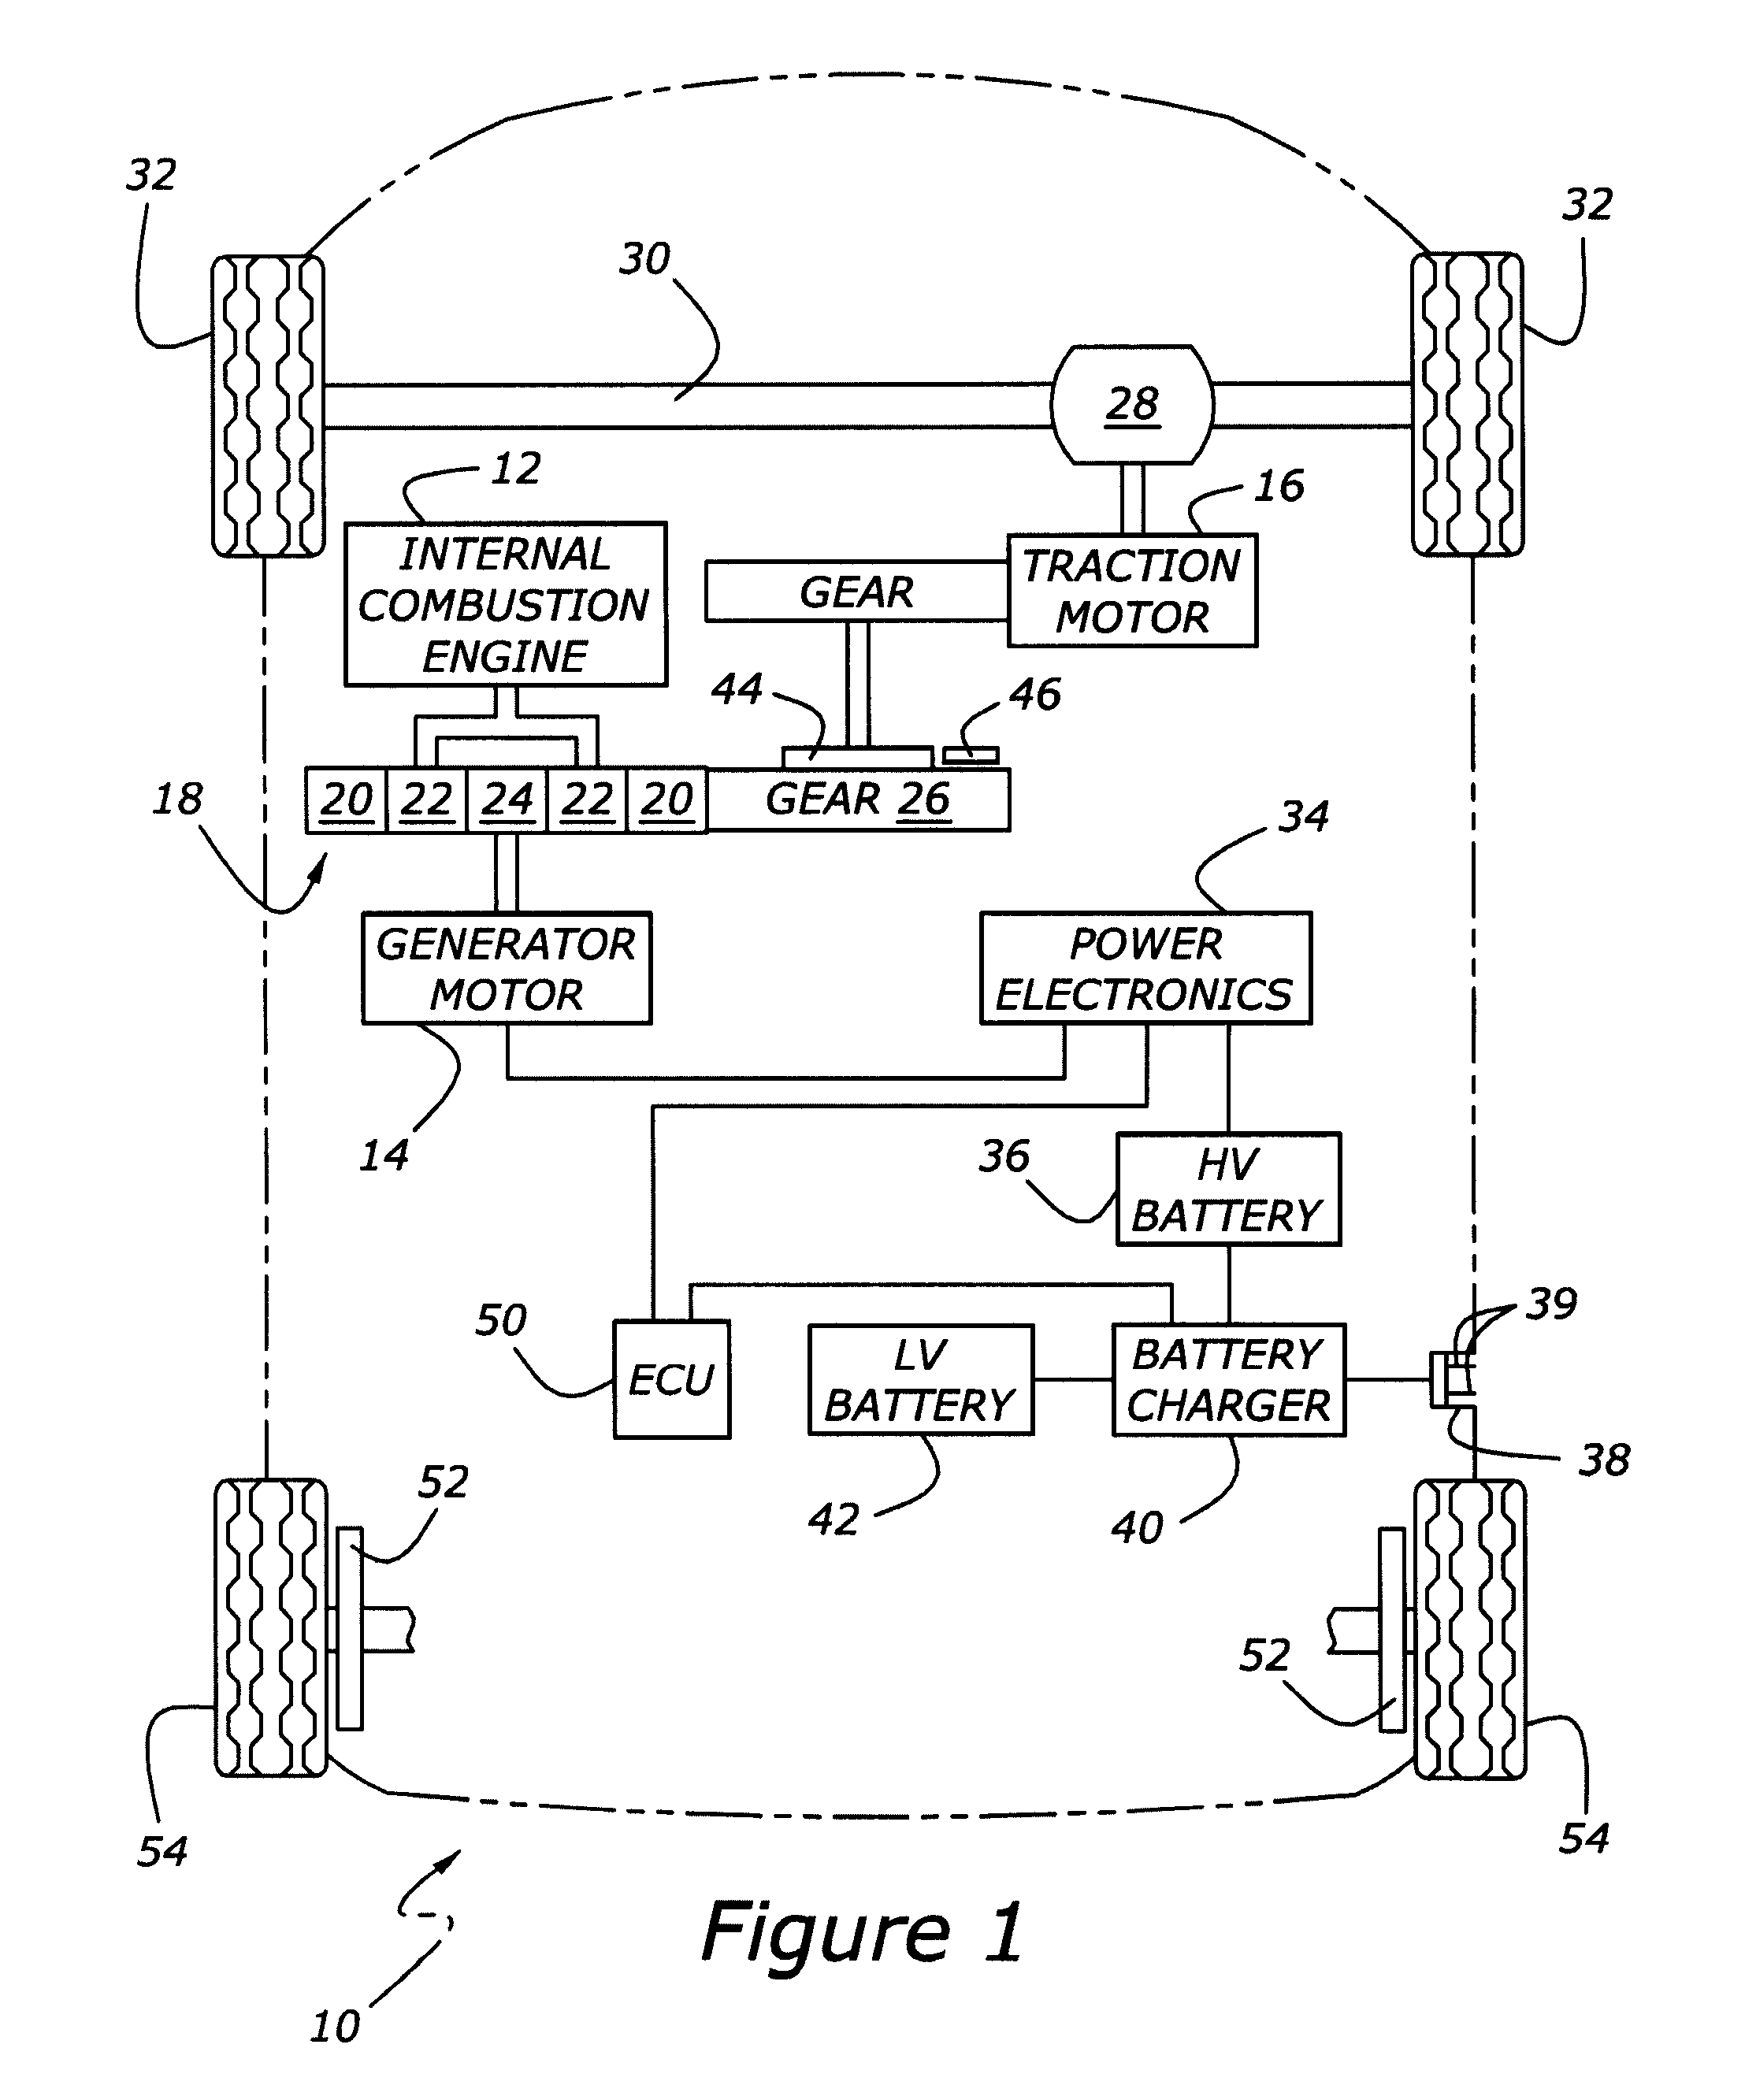 Method And System To Charge Batteries Only While Vehicle Is Parked